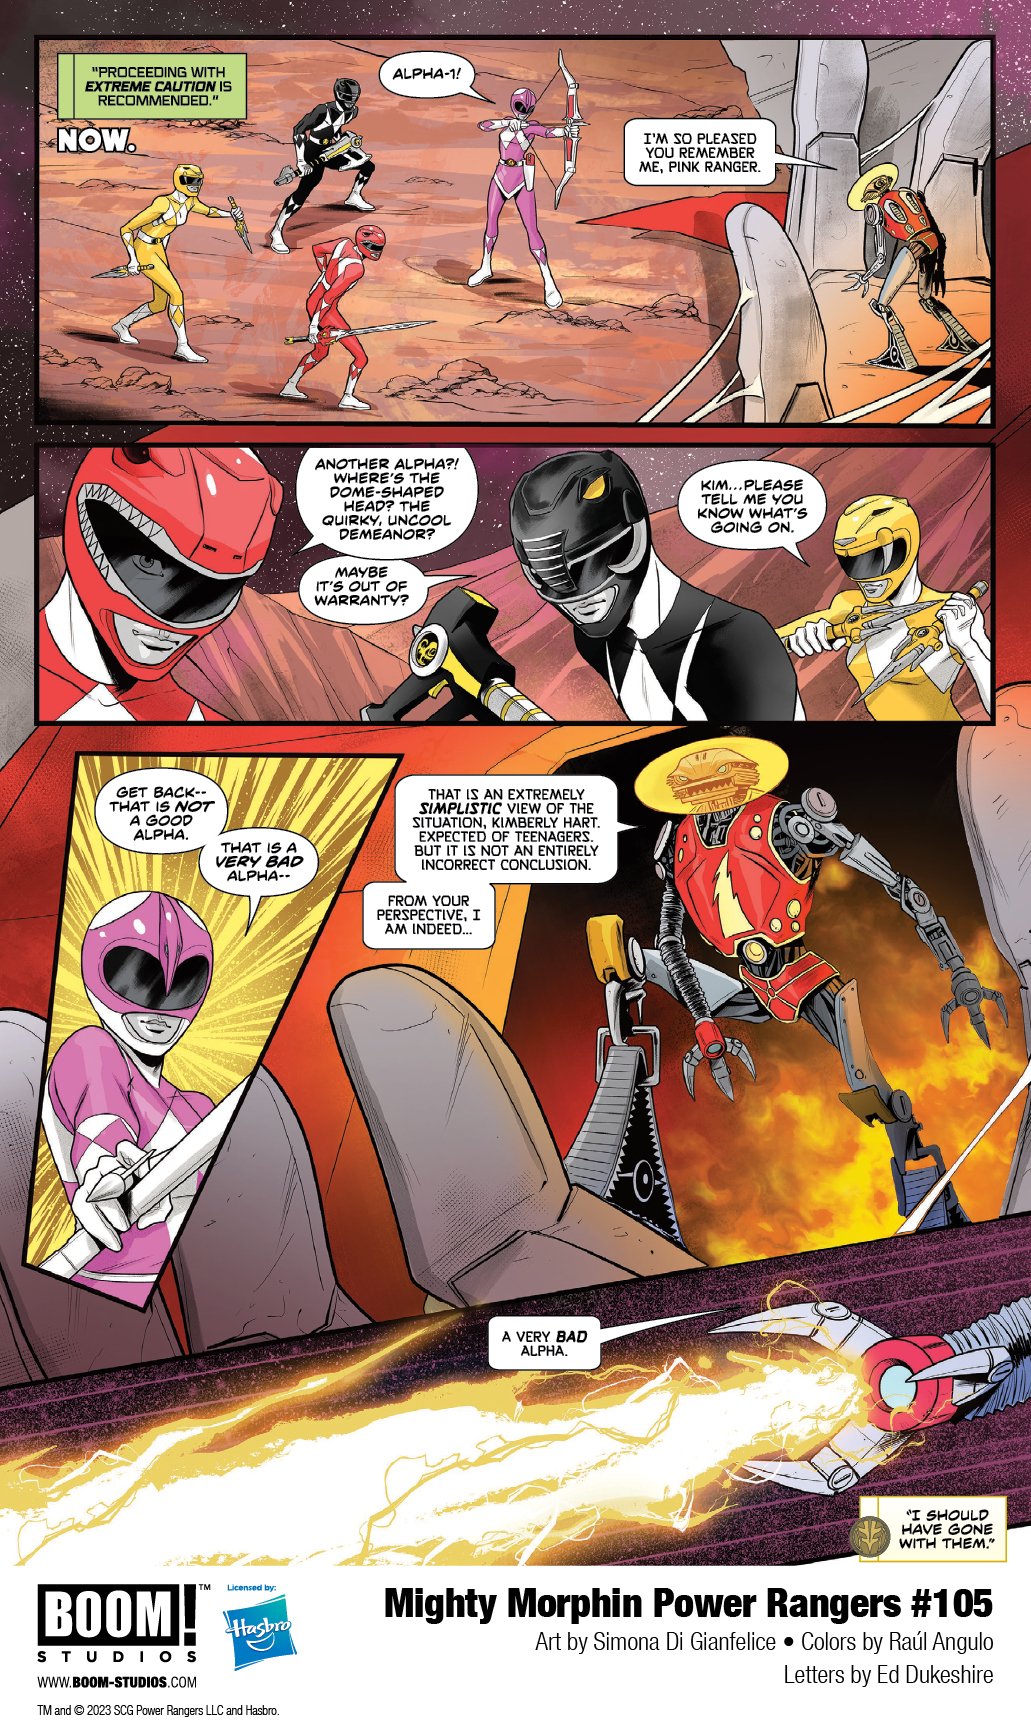 VG and Anime Rangers #1 - Mighty Morphin by NeonStudioKnightZone